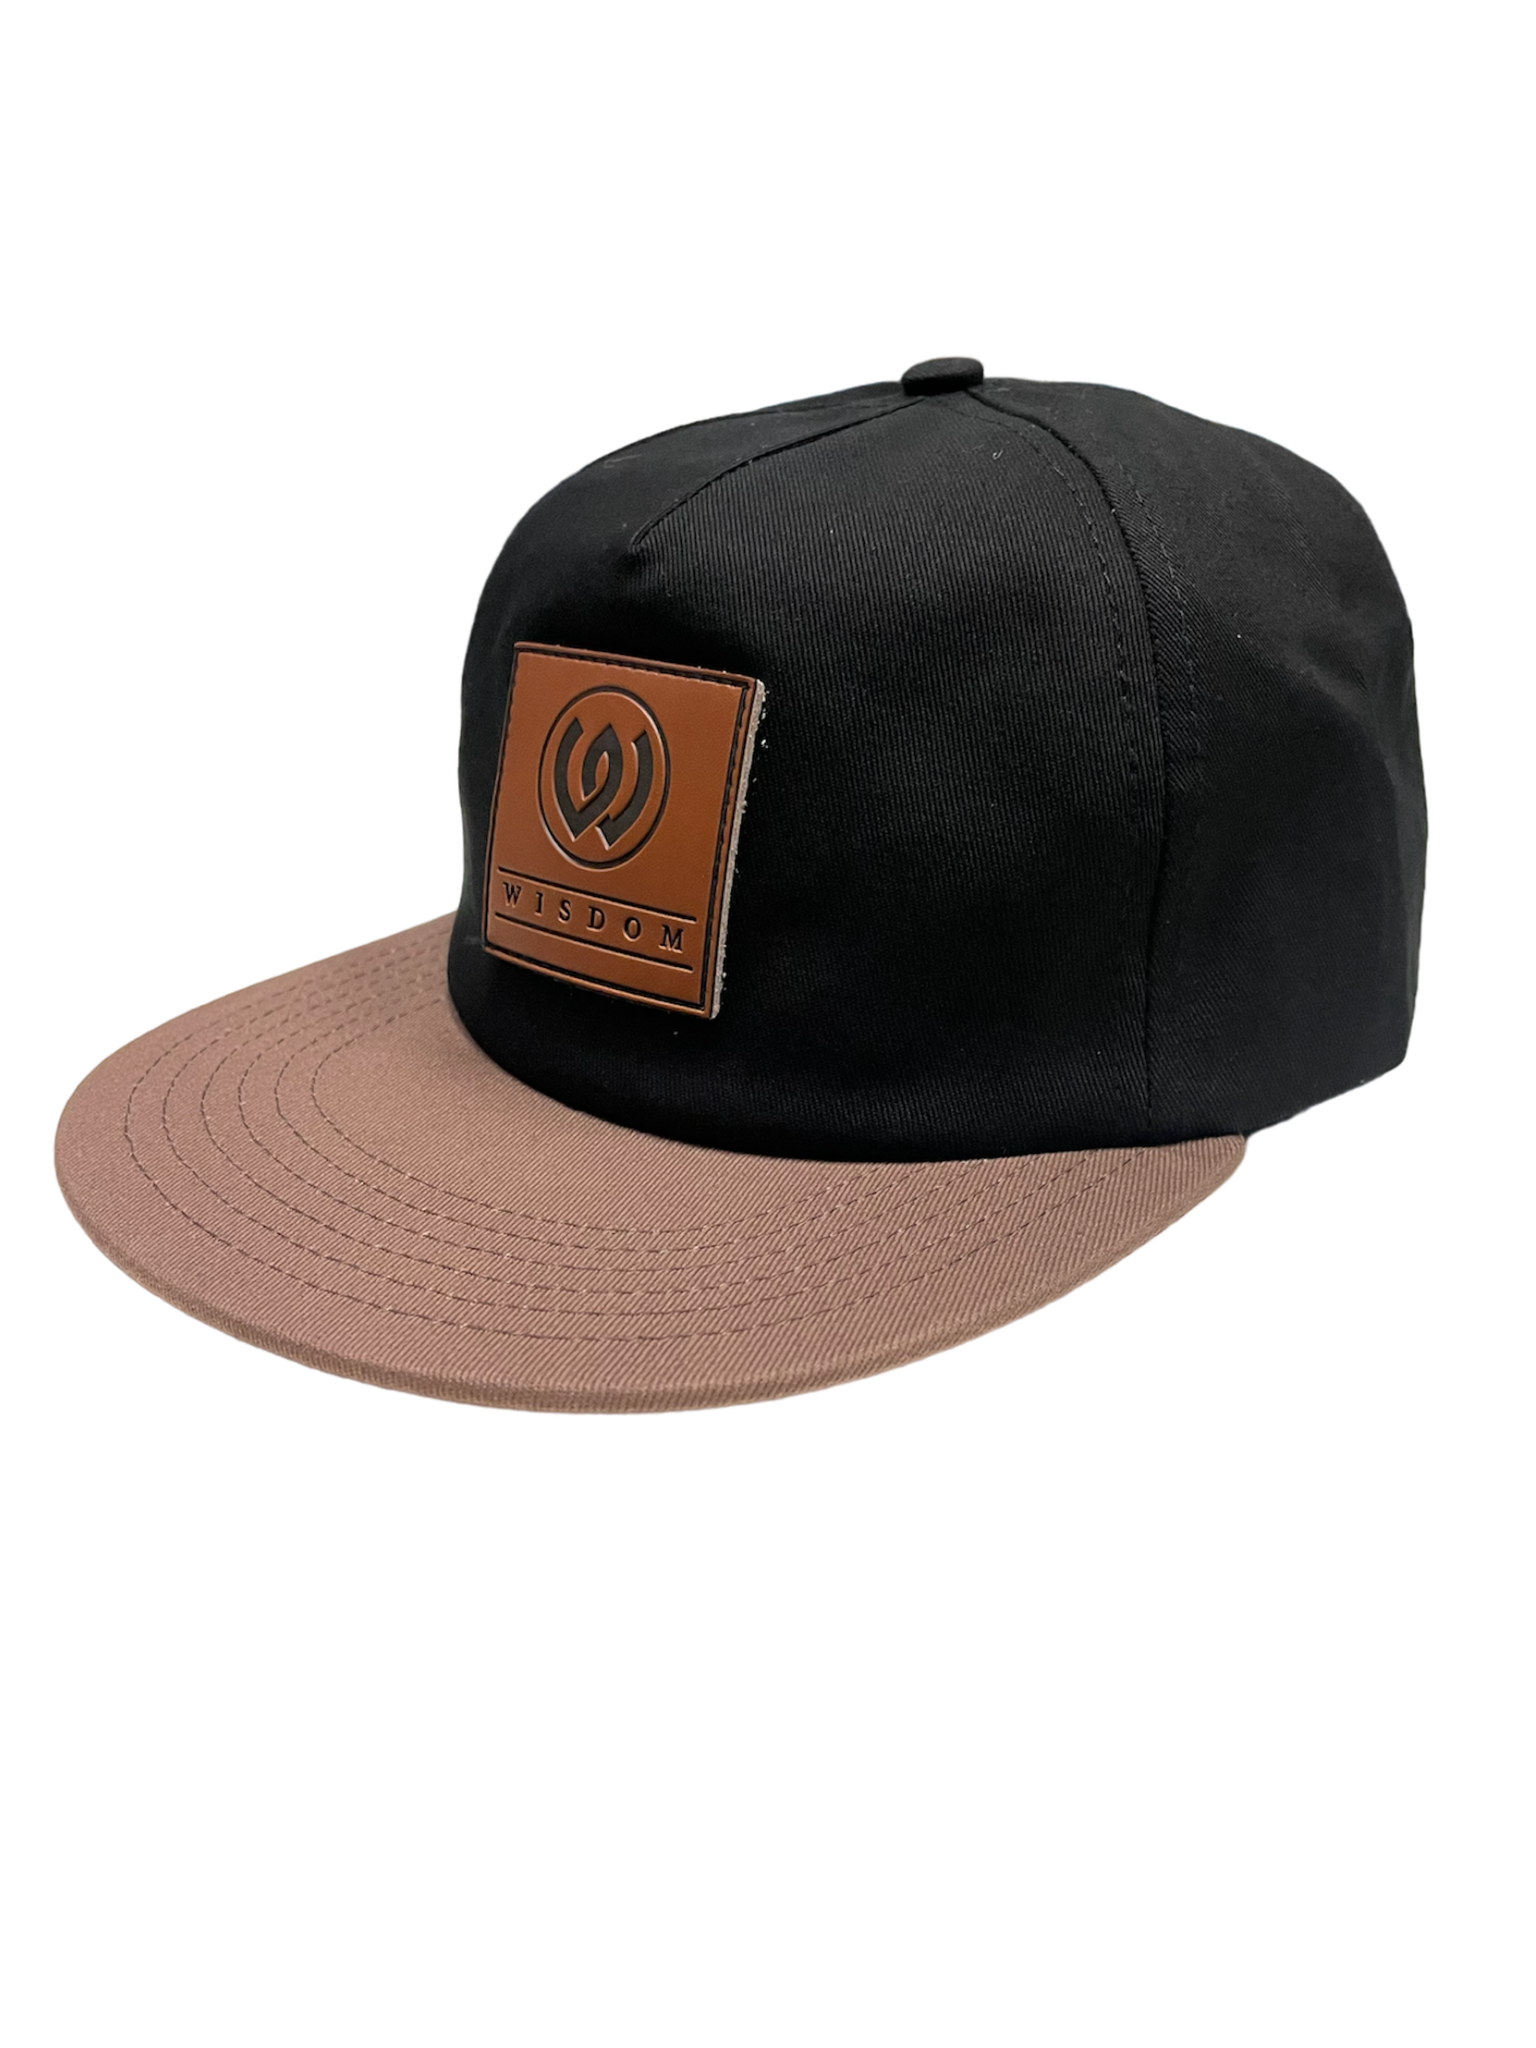 Wisdom Leather Patch Unstructured Hat